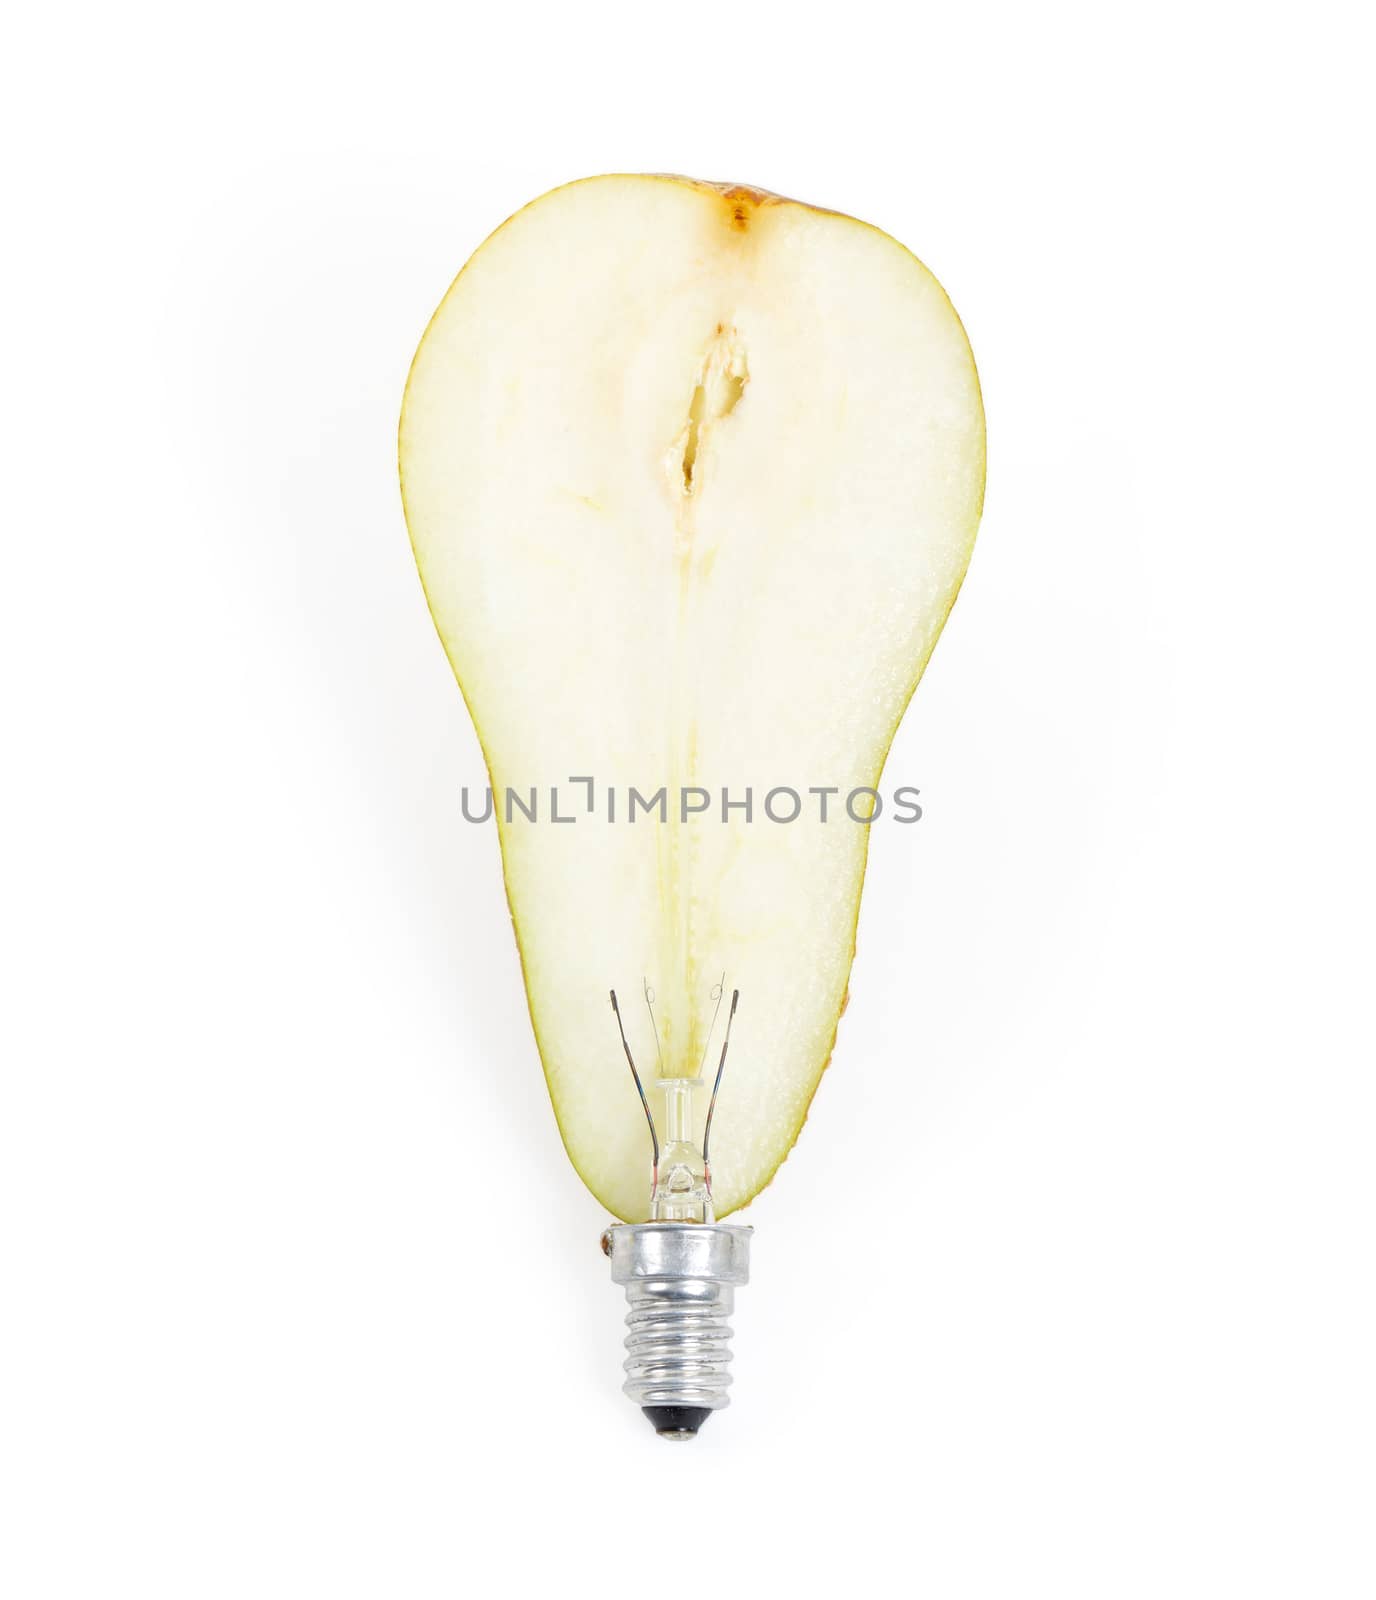 Light bulb made out of a pear by michaklootwijk